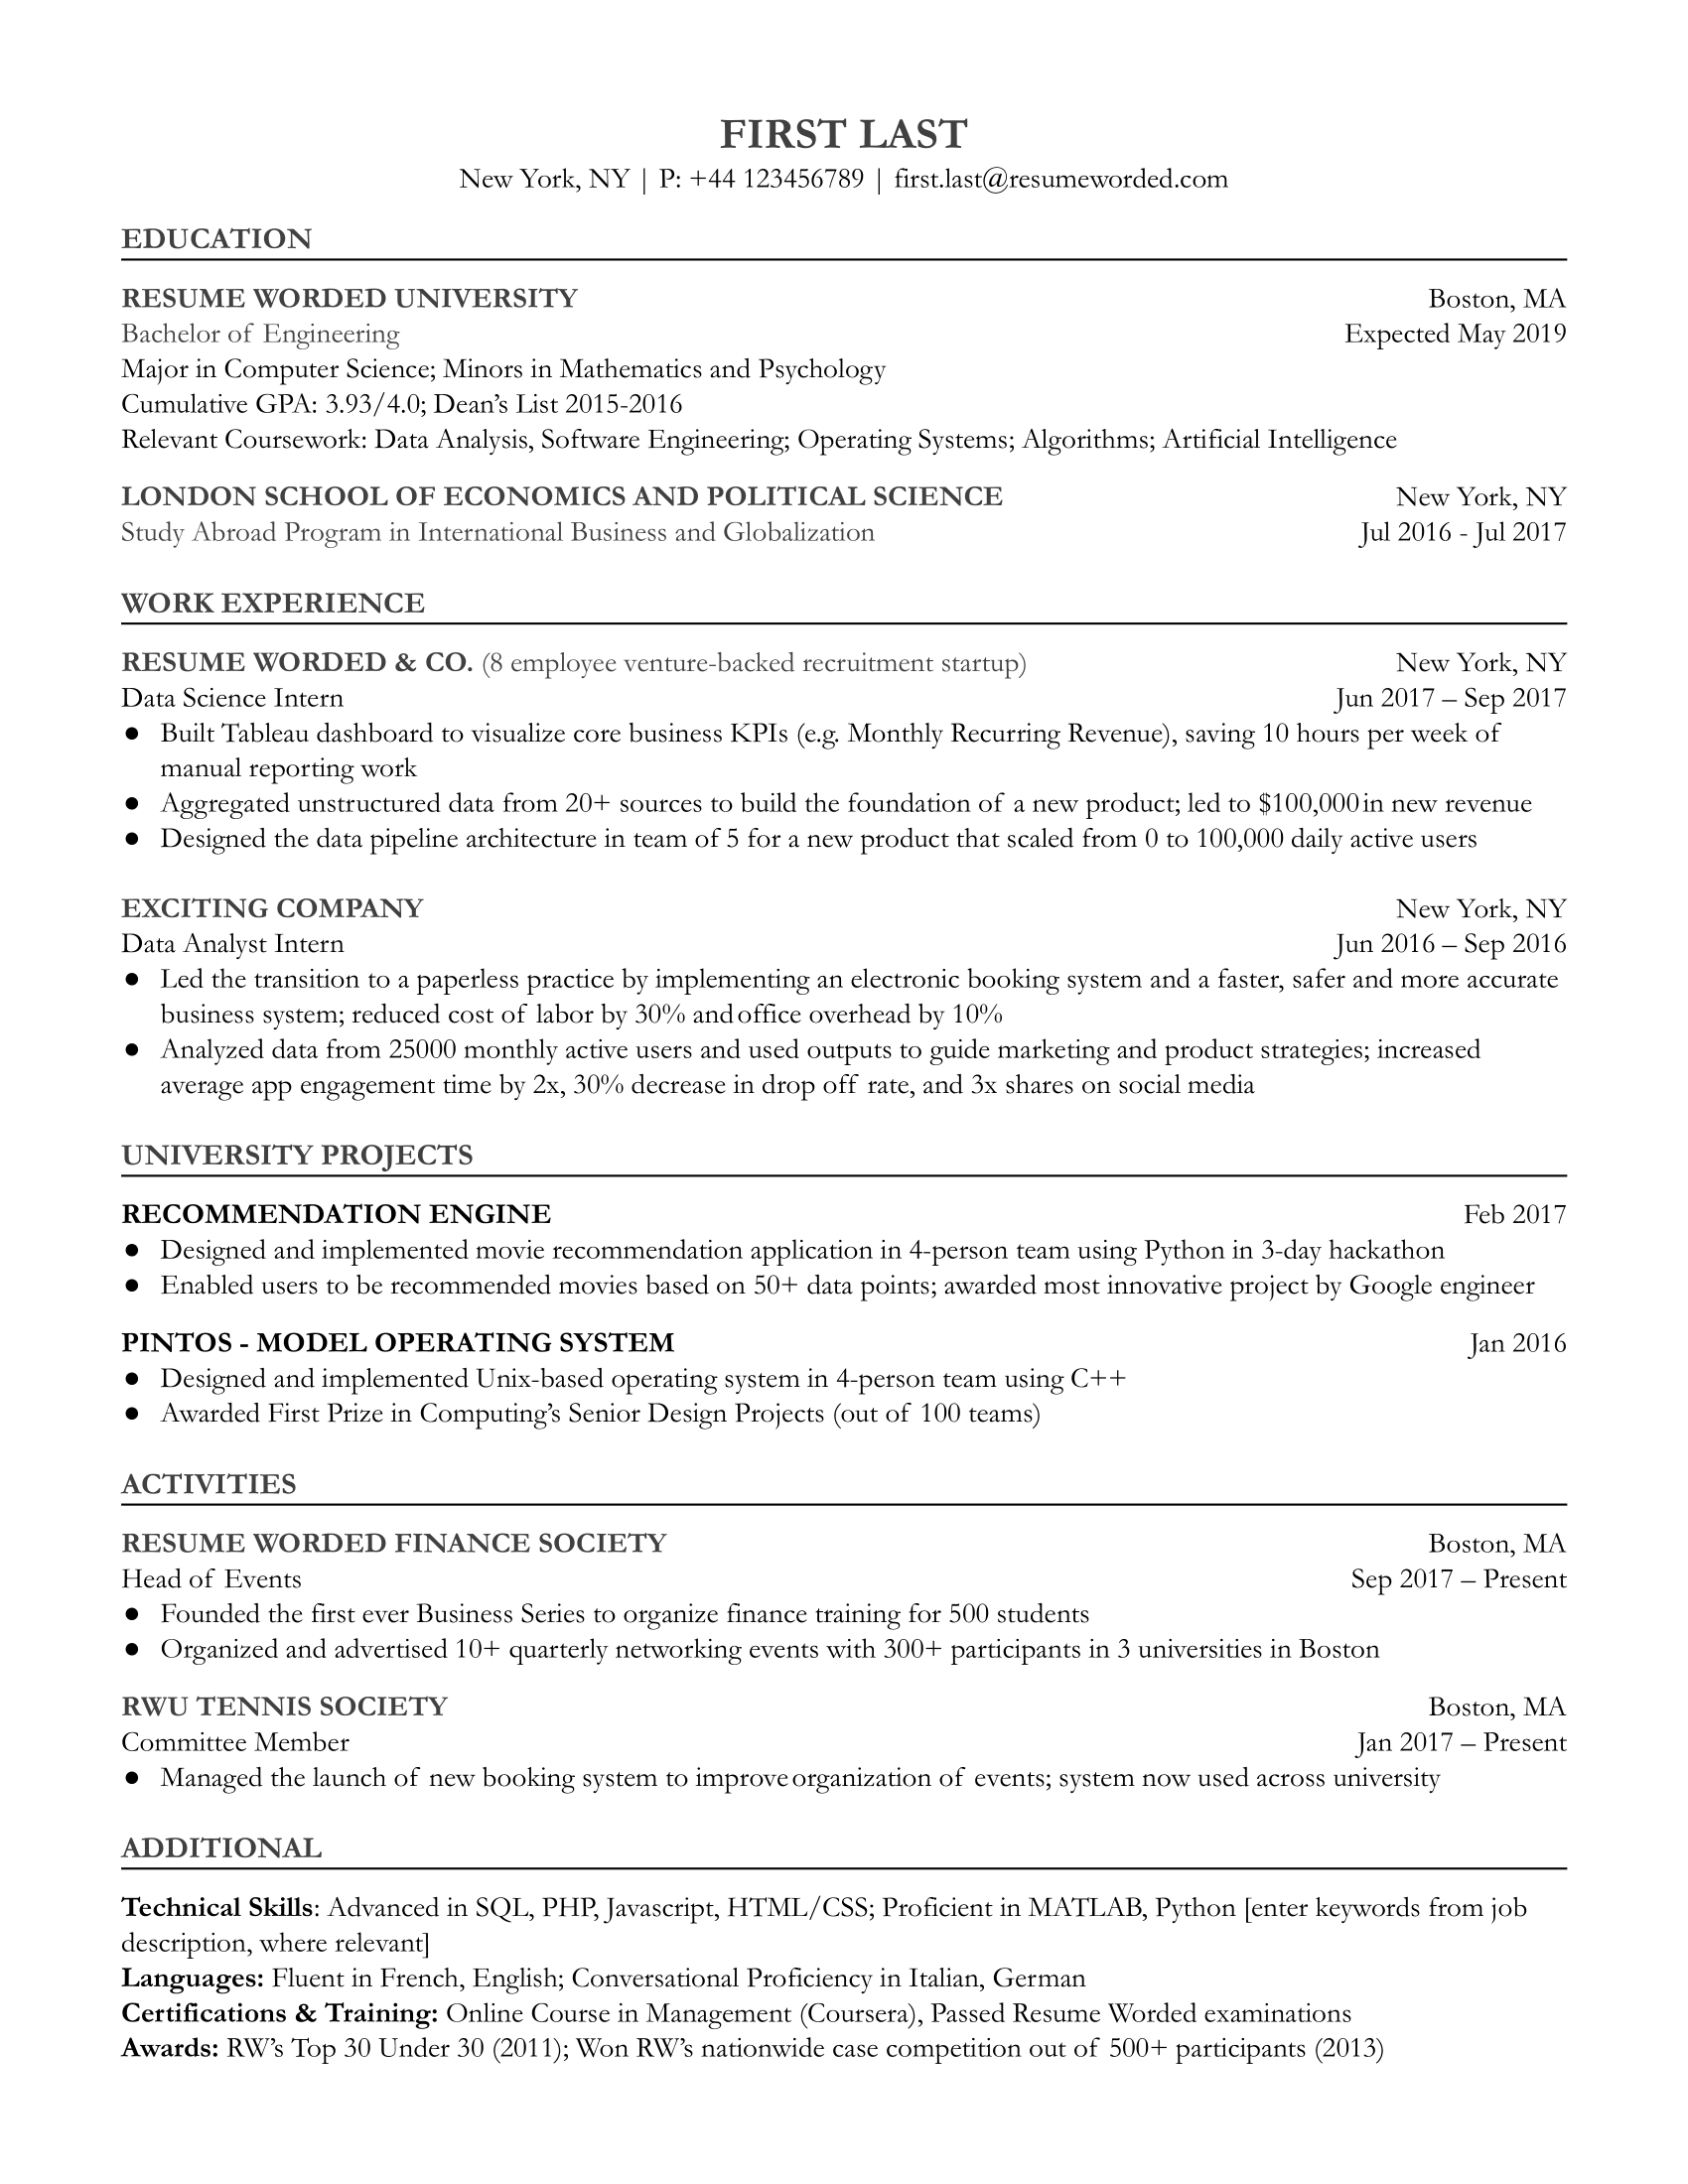 Entry Level Data Scientist Resume Example for 5  Resume Worded